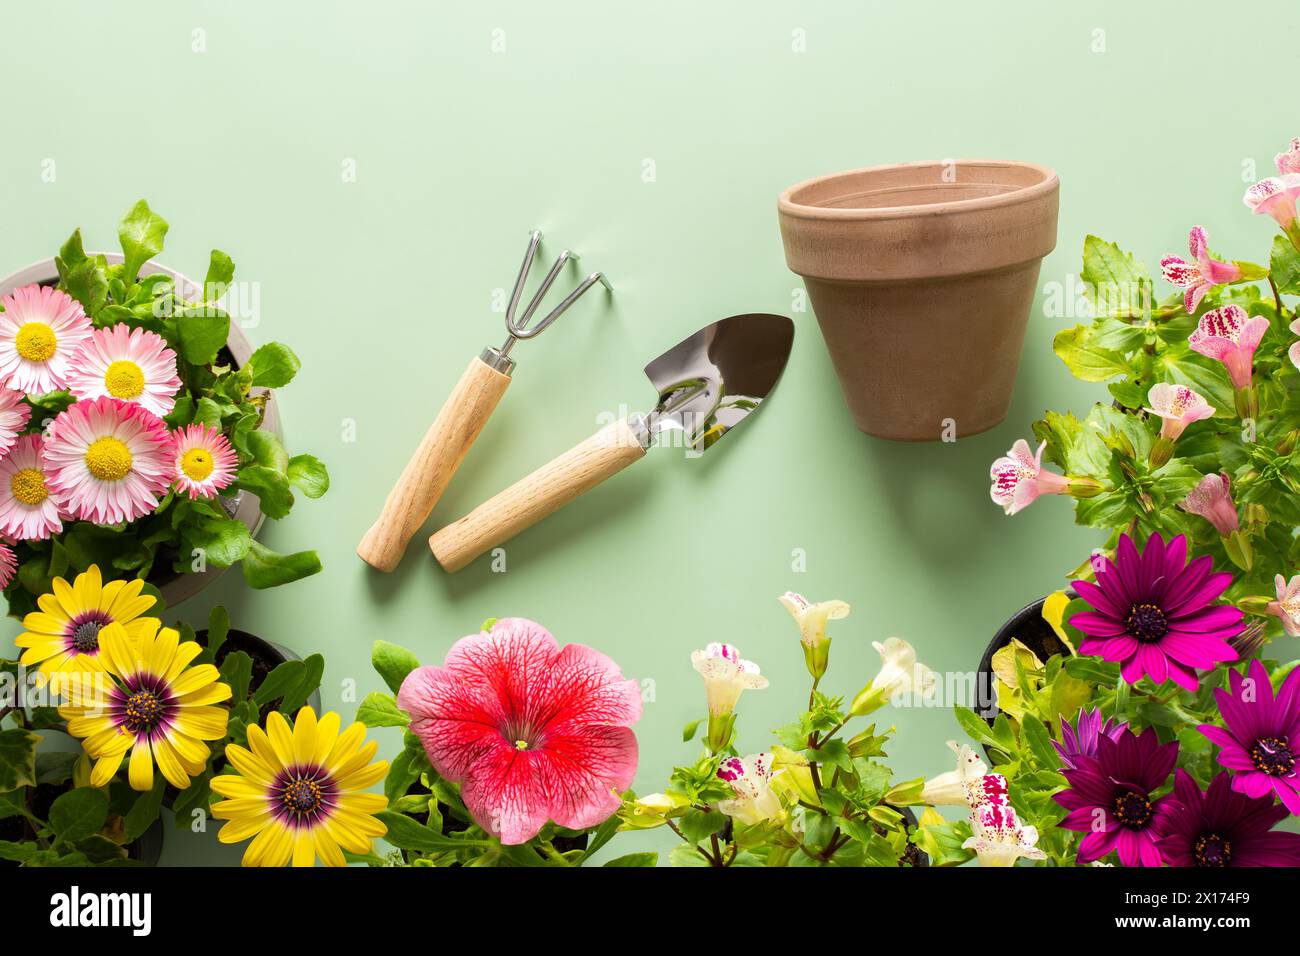 Spring decoration of a home balcony or terrace with flowers, Osteospermum and Mimulus and Petunia on a green background, home gardening and hobbies, biophilic design Stock Photo